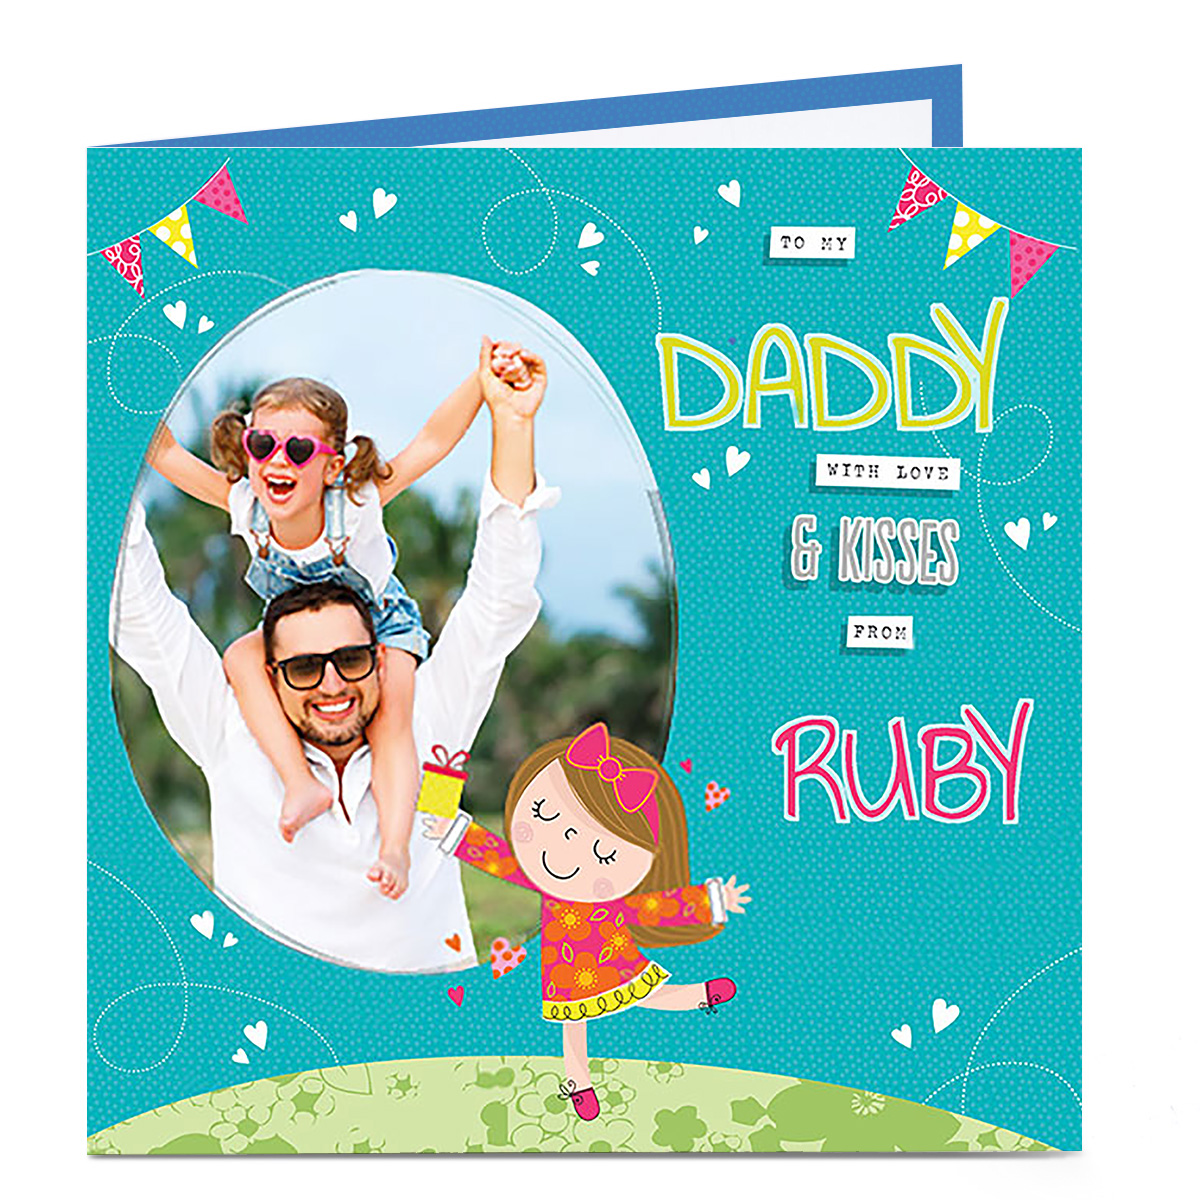 Personalised Birthday Photo Card - From their little girl